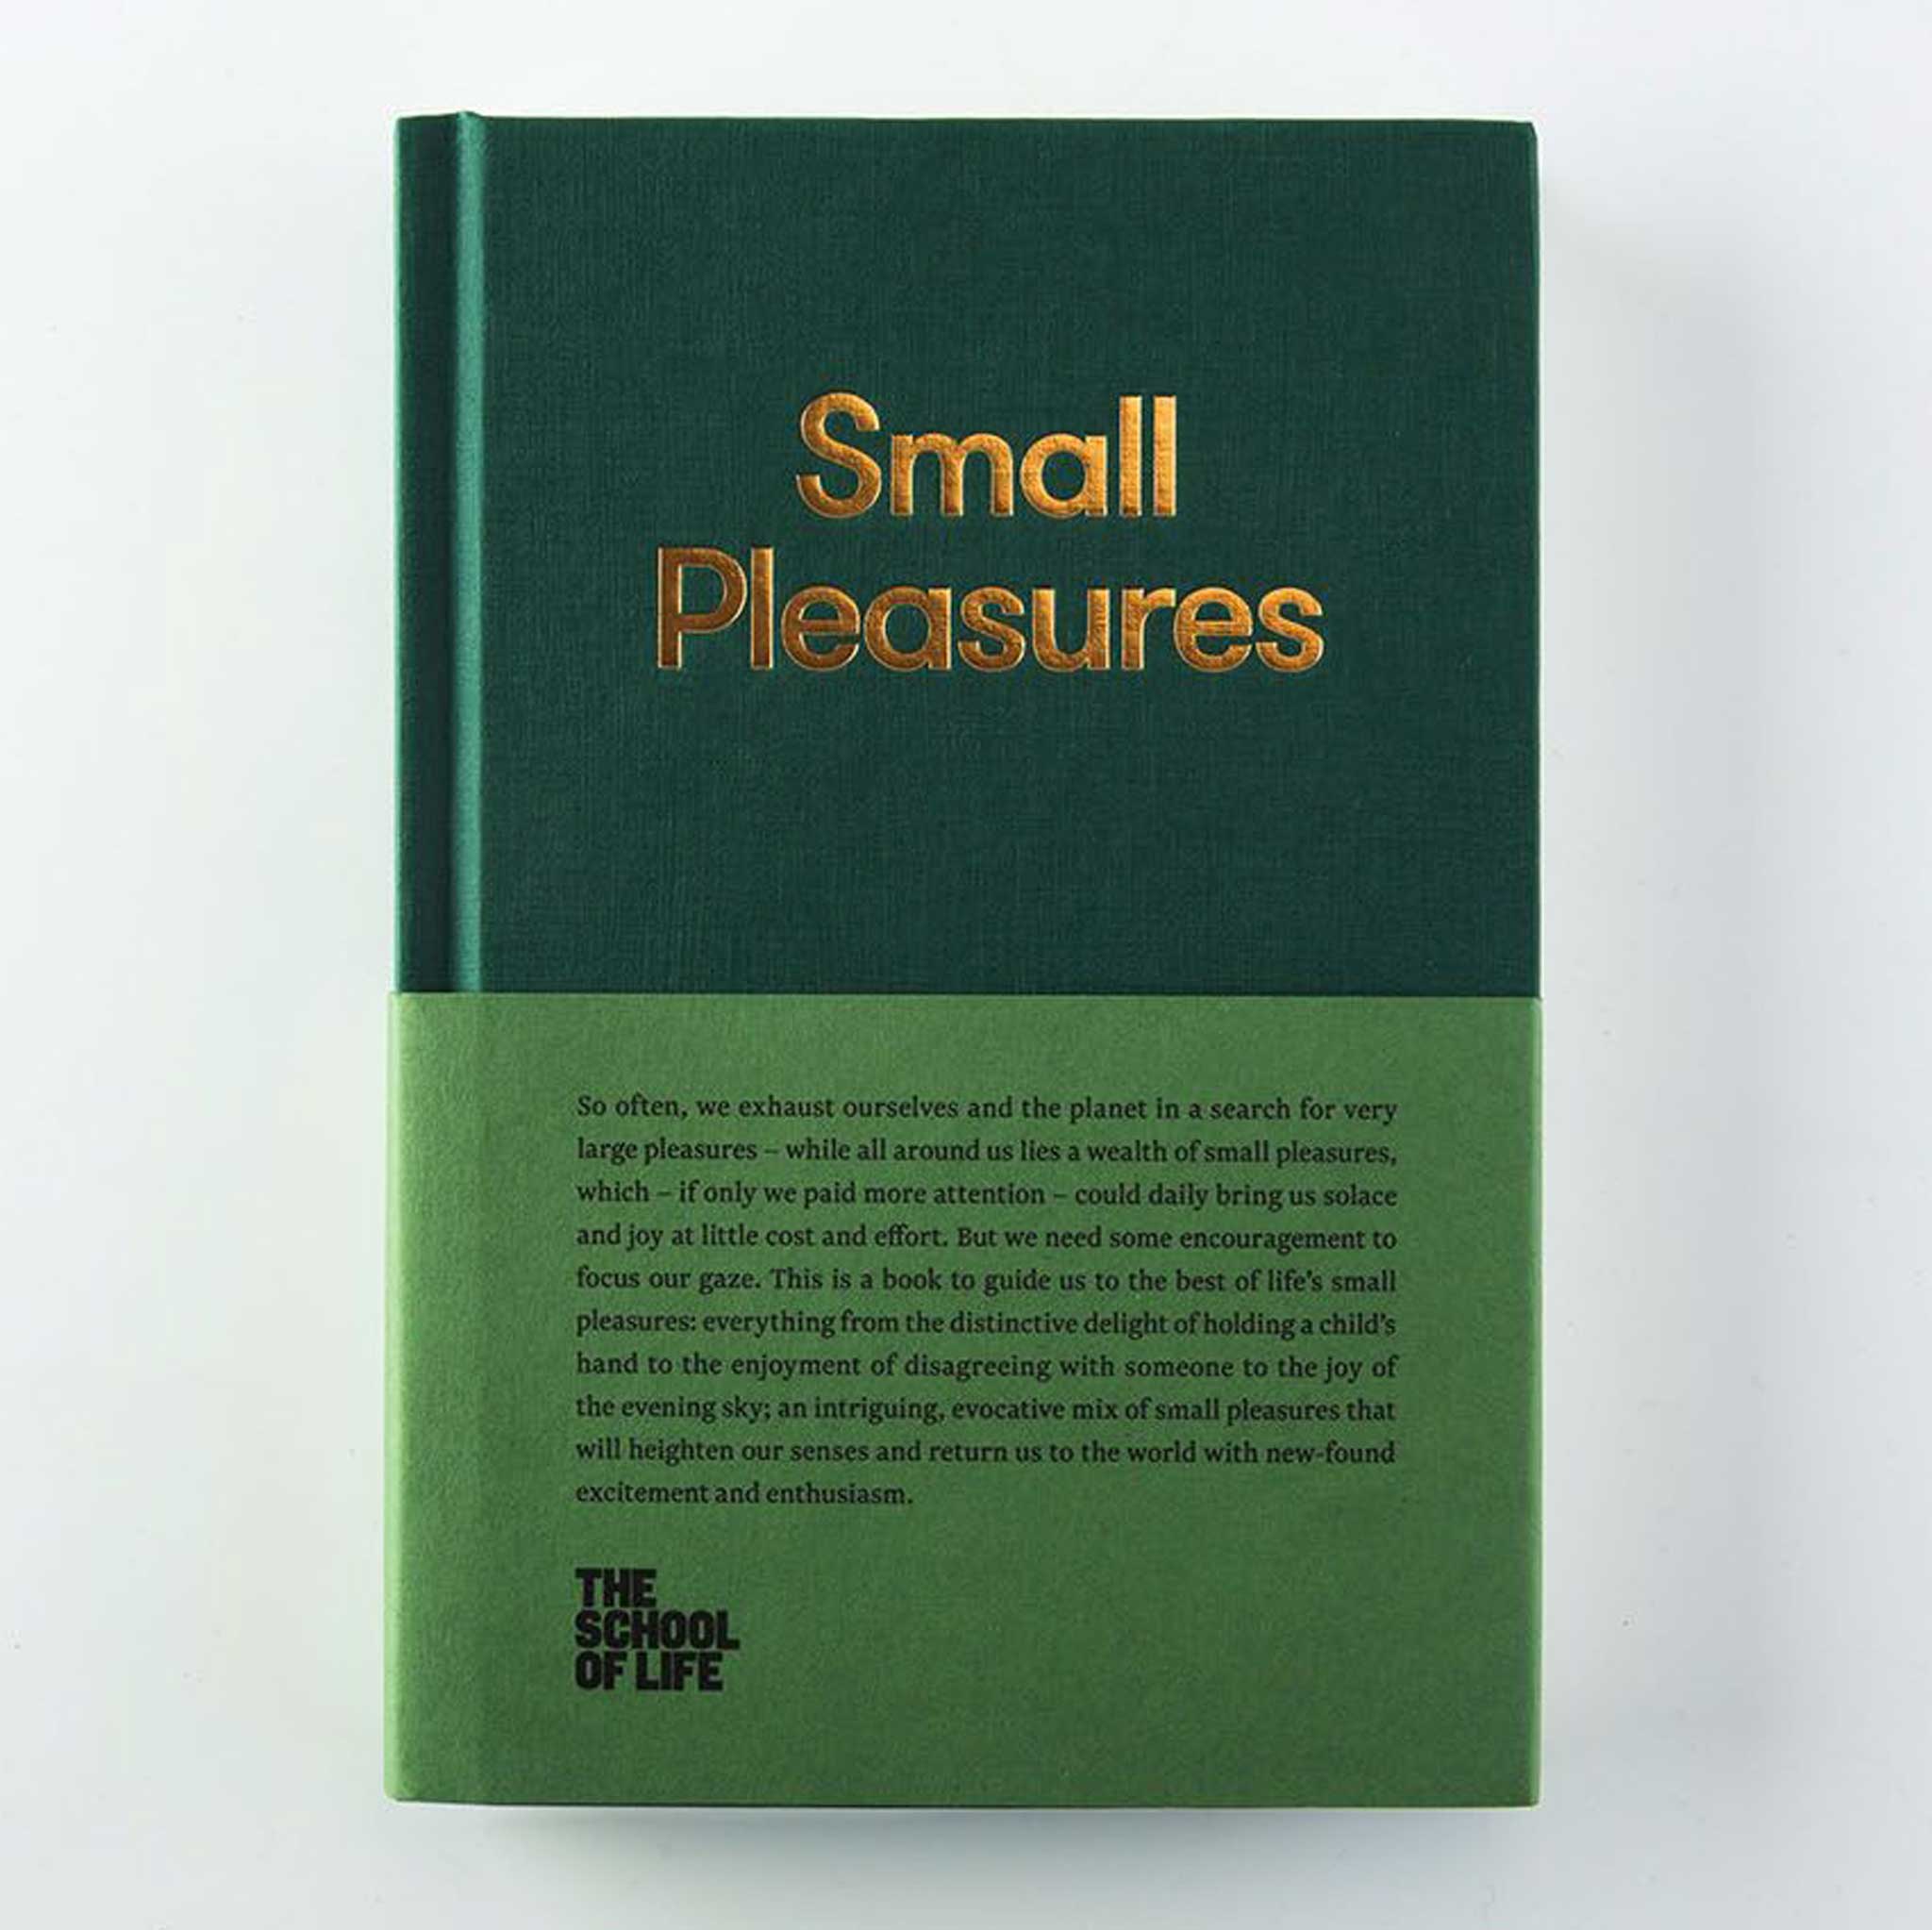 SMALL PLEASURES | BOOK | English Edition | The School of Life